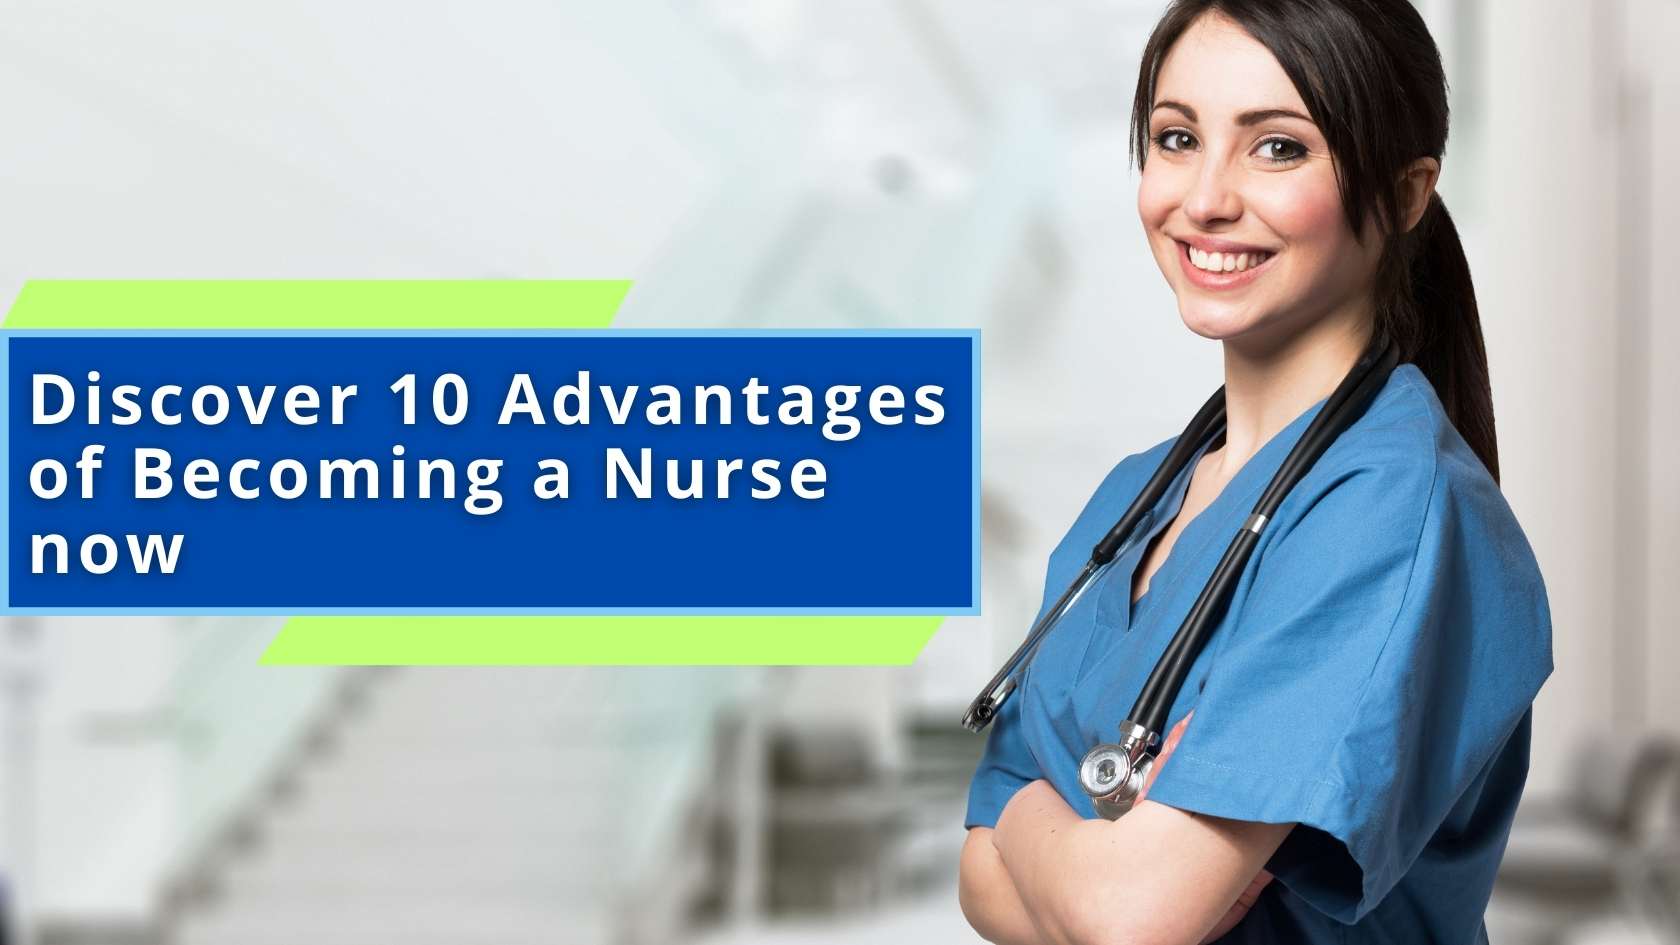 Discover 10 Advantages of Becoming a Nurse now